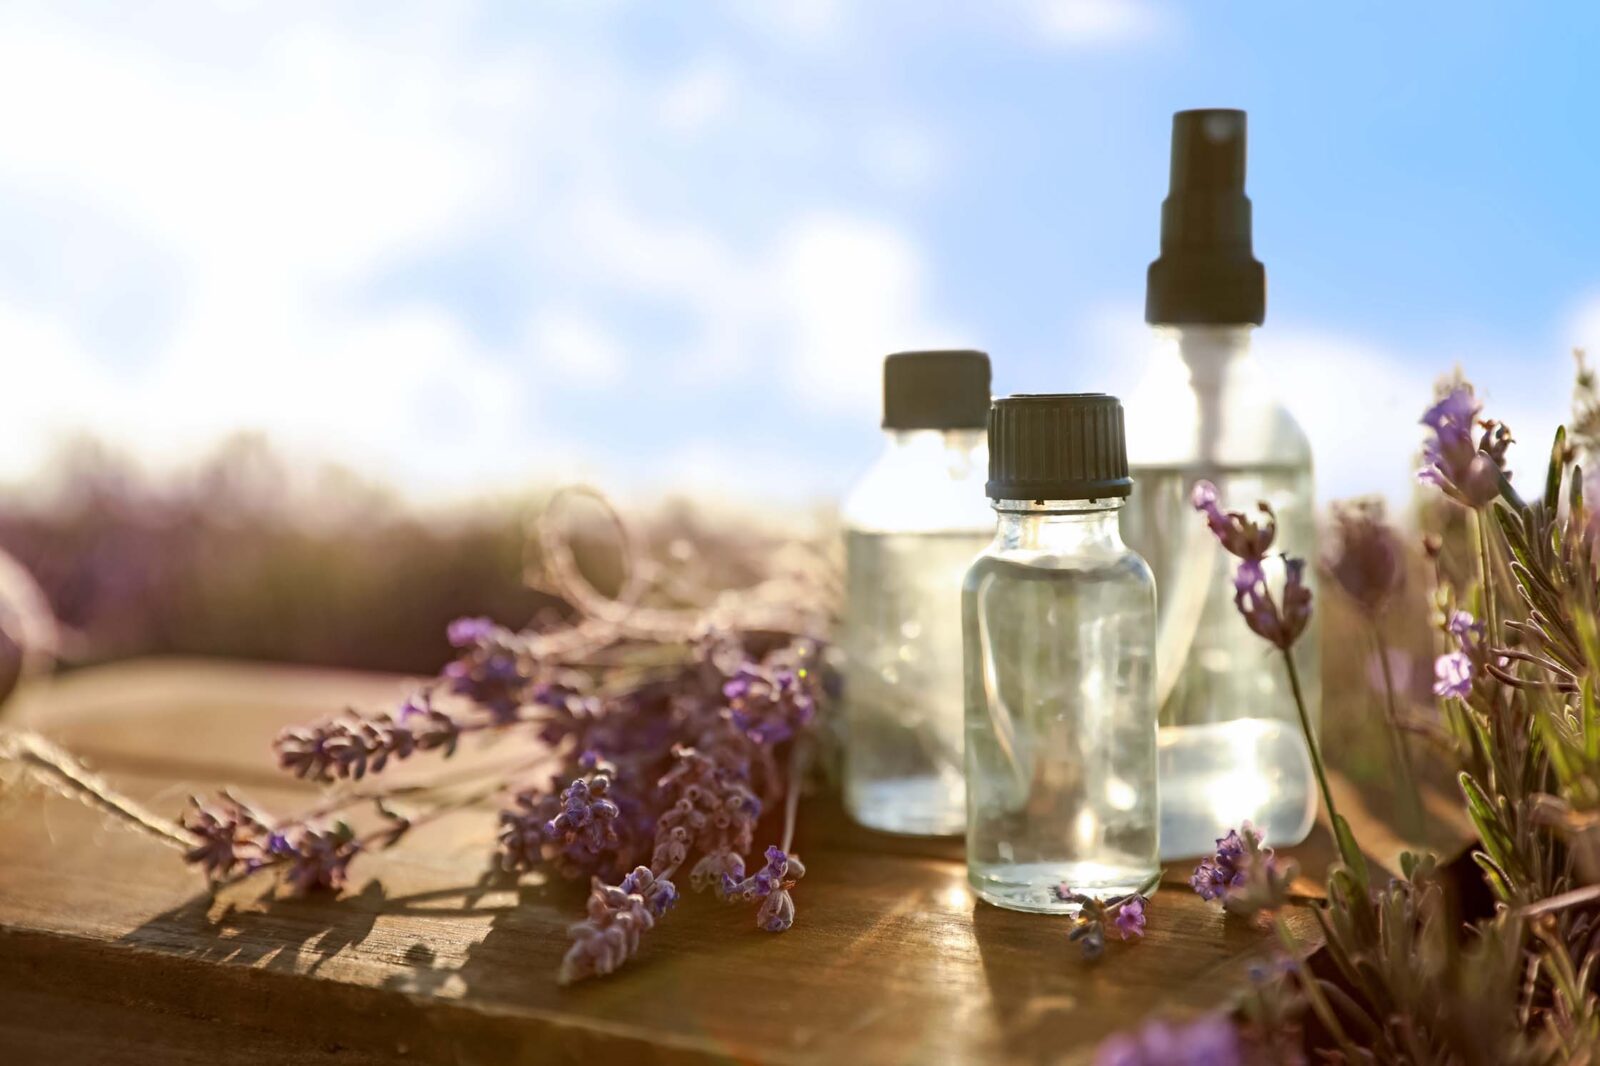 Bottles of lavender essential oil on wooden table in field.